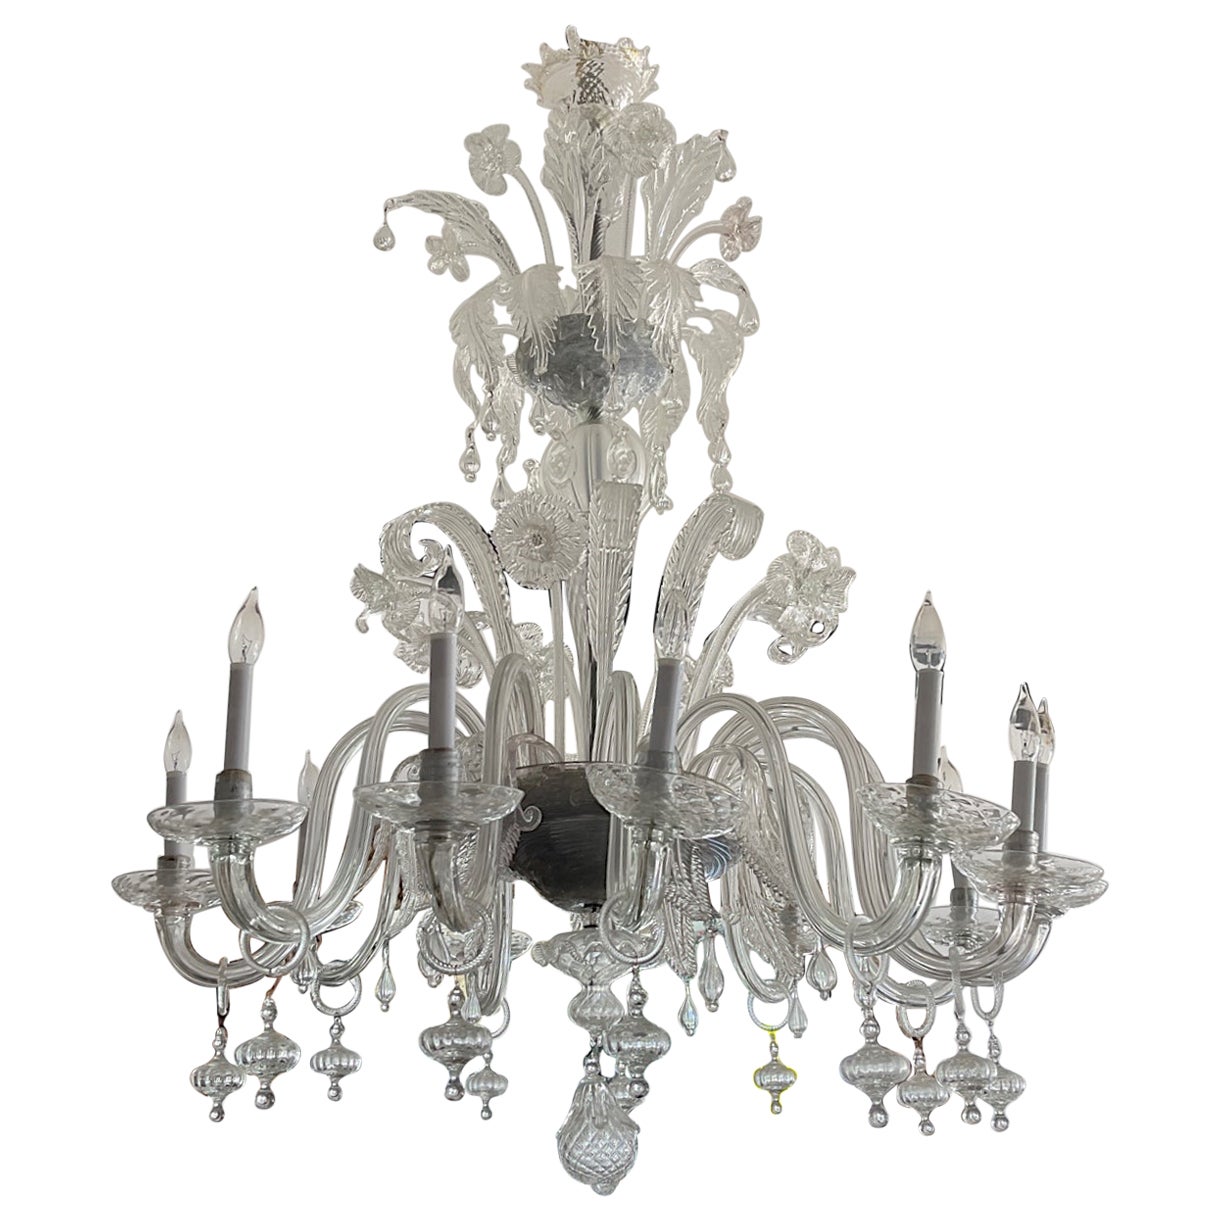 Italian 1950s 12 Arm Murano Transparent Glass Chandelier with Pleated Shades